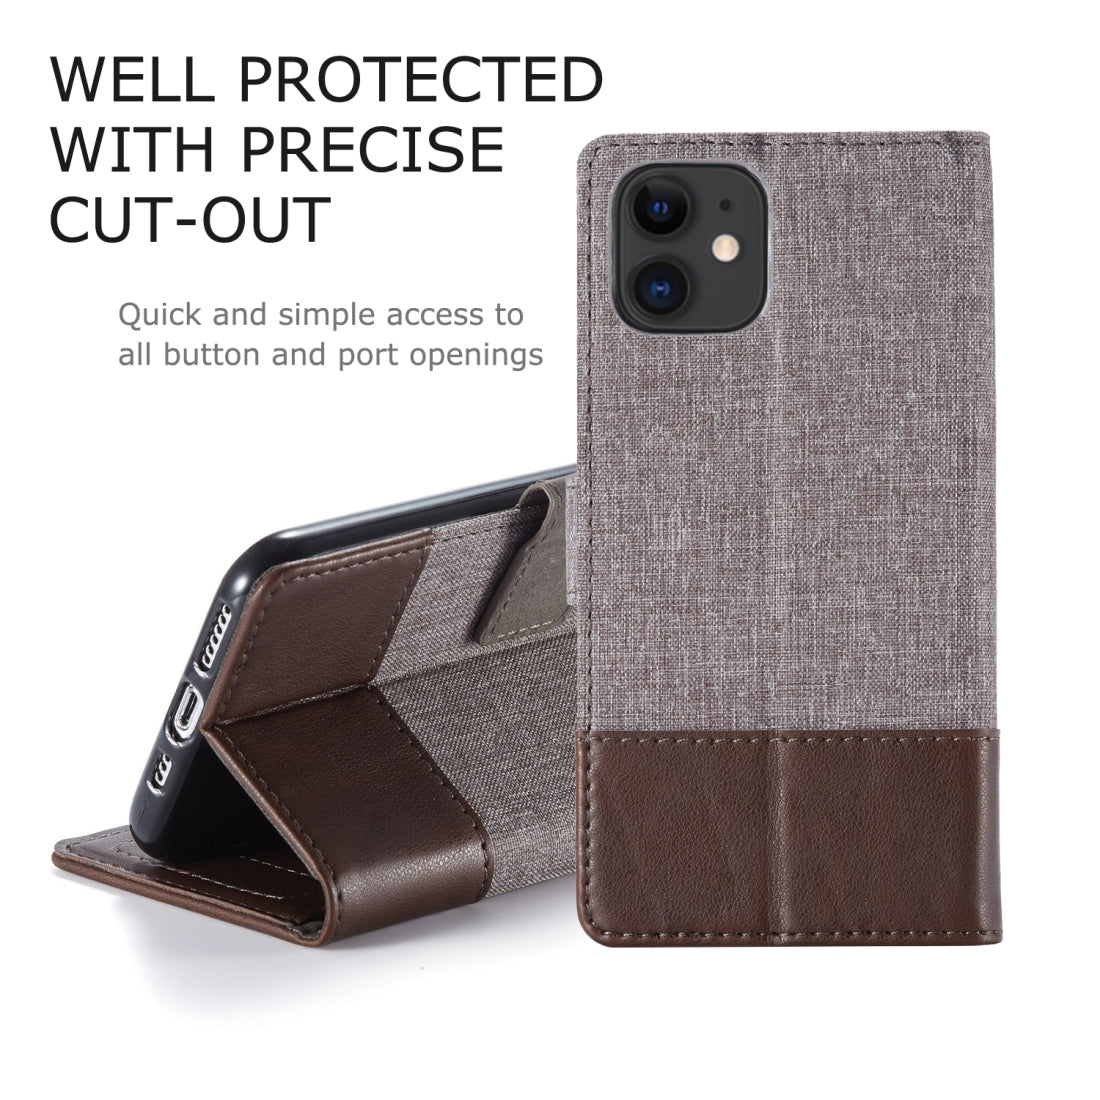 For iPhone 11 MUXMA MX102 Horizontal Flip Canvas Leather Case with Stand & Card Slot & Wallet Function(Brown)